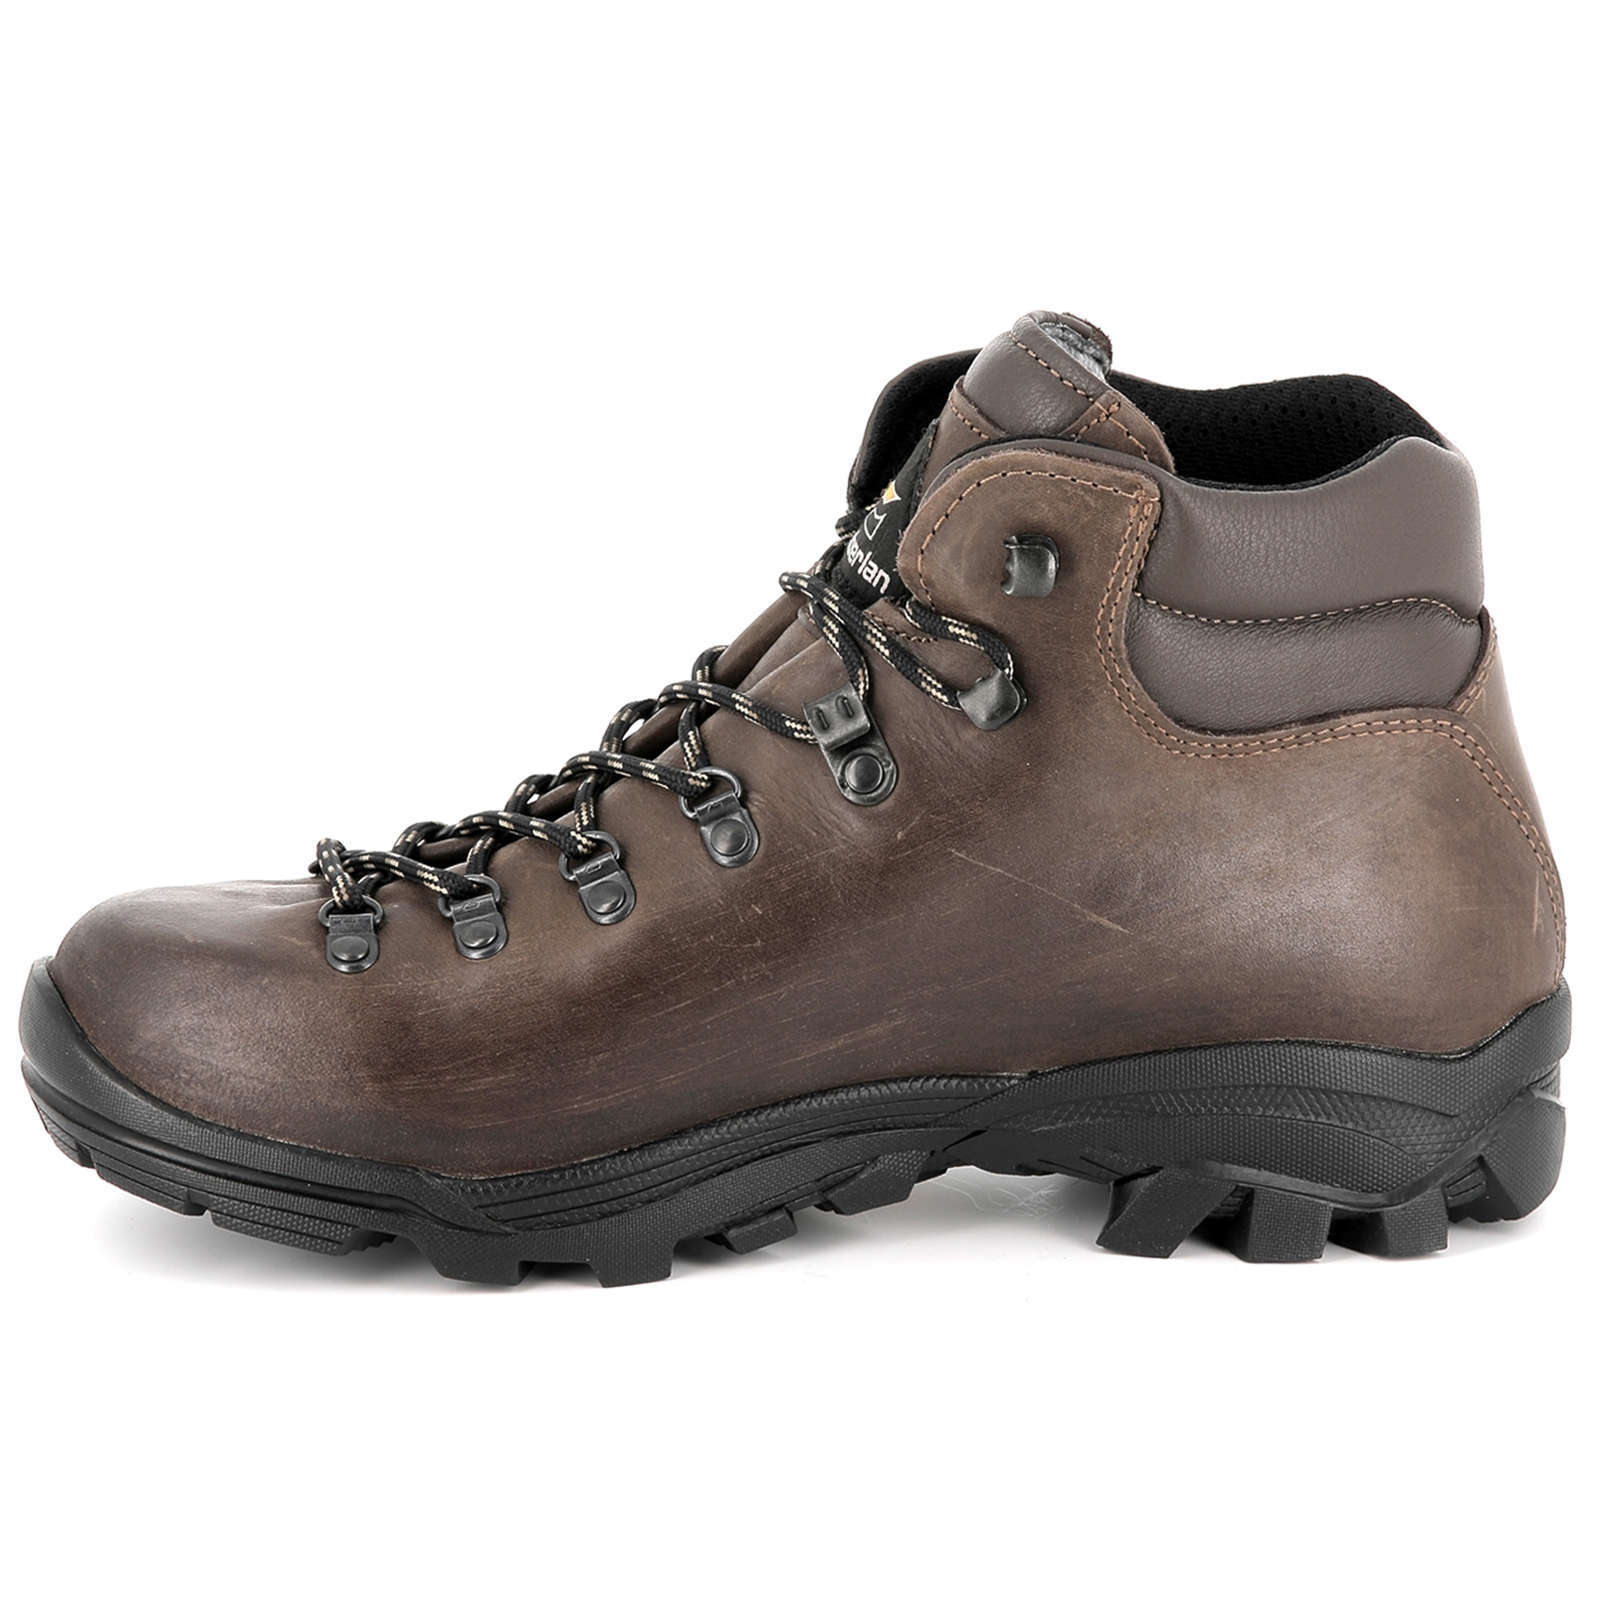 Zamberlan 309 New Trail Lite GTX Leather Men's Water Repellent Hiking Boots#color_waxed chestnut